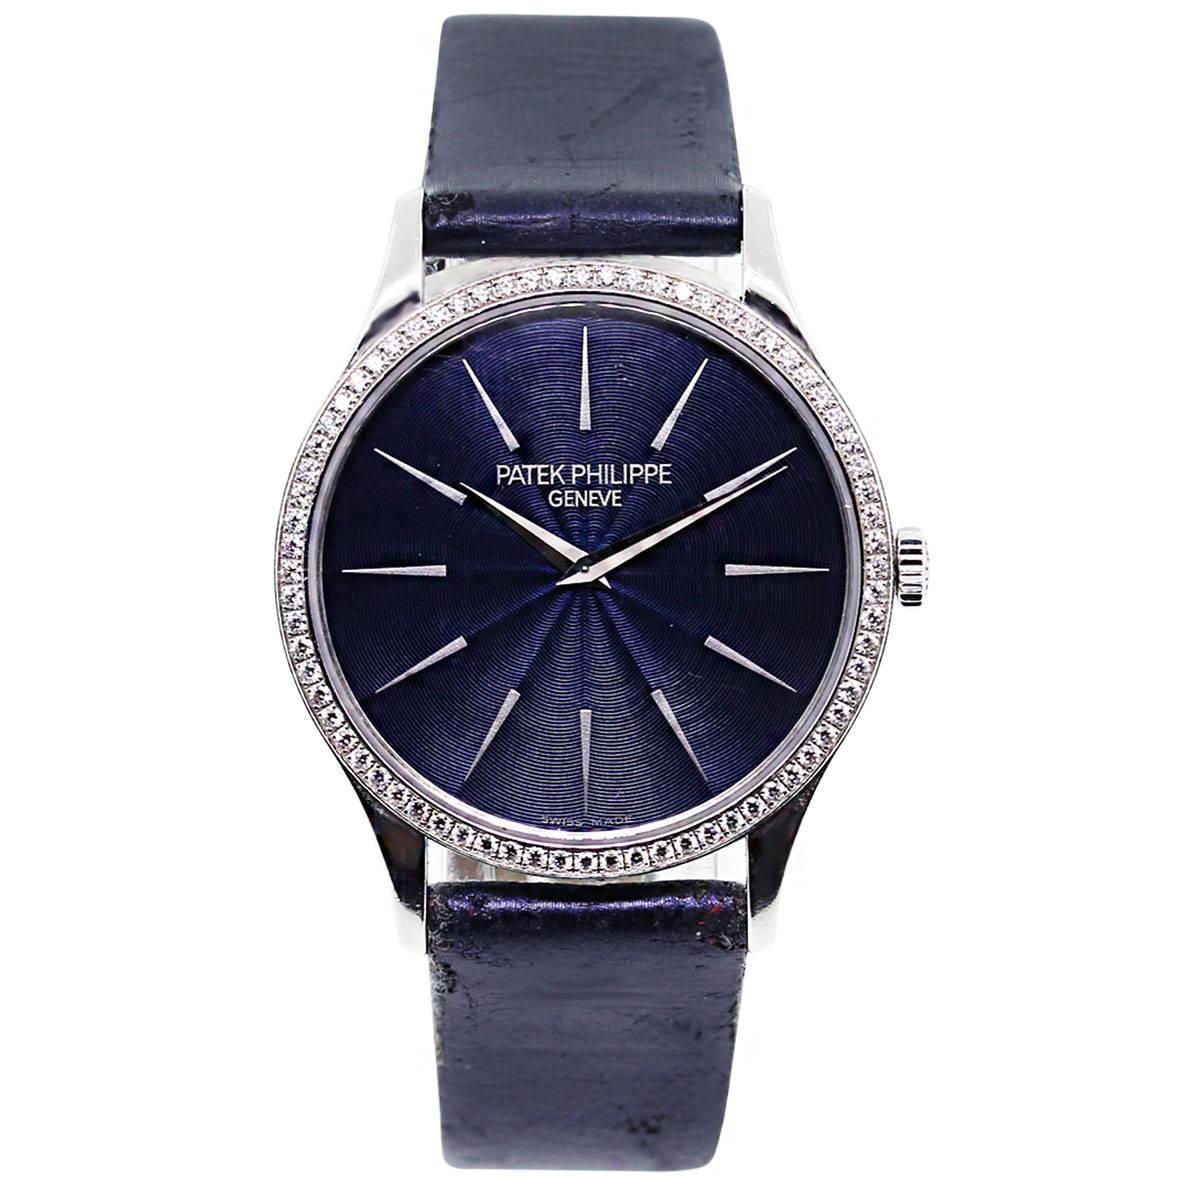 Brand: Patek
Style: Calatrava 4896G-001 18k White Gold Diamond Bezel Ladies Watch
MPN: 4896G-001
Case Material: 18k White Gold
Case Diameter: 33mm
Bezel: 18k White Gold and Factory Diamond Bezel
Dial: Blue dial, with silver hour markers and